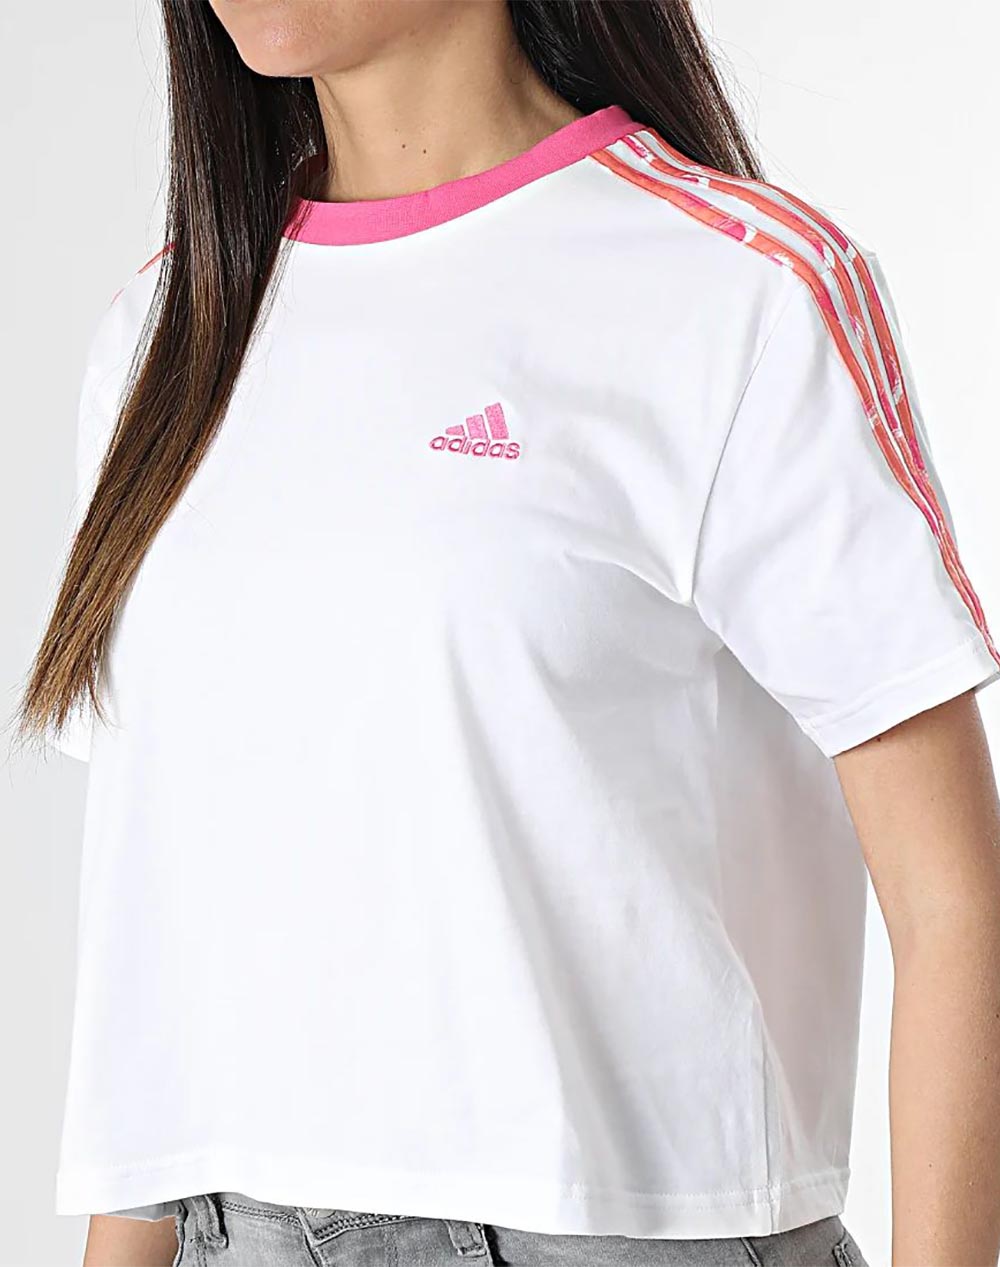 ADIDAS TOP White CR TOP W 3S 